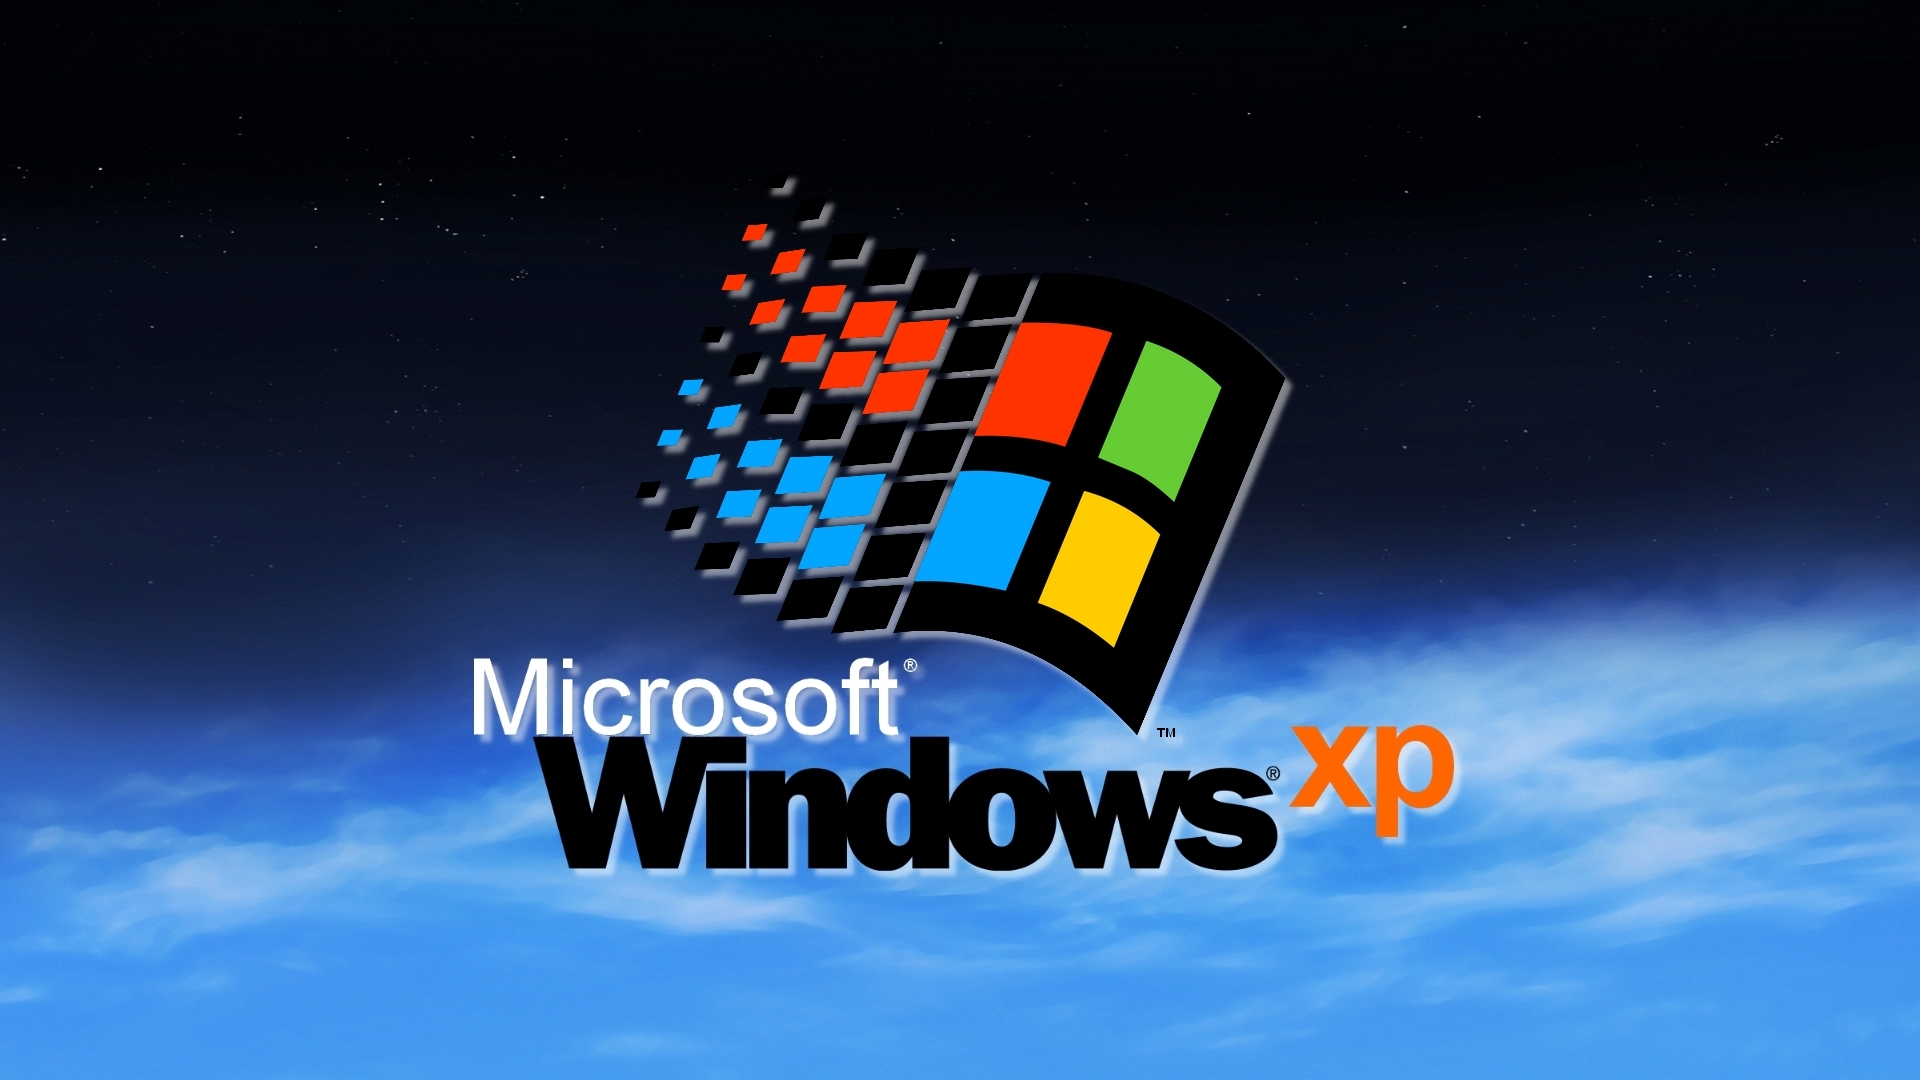 Windows xp nt sky old logo by eric on